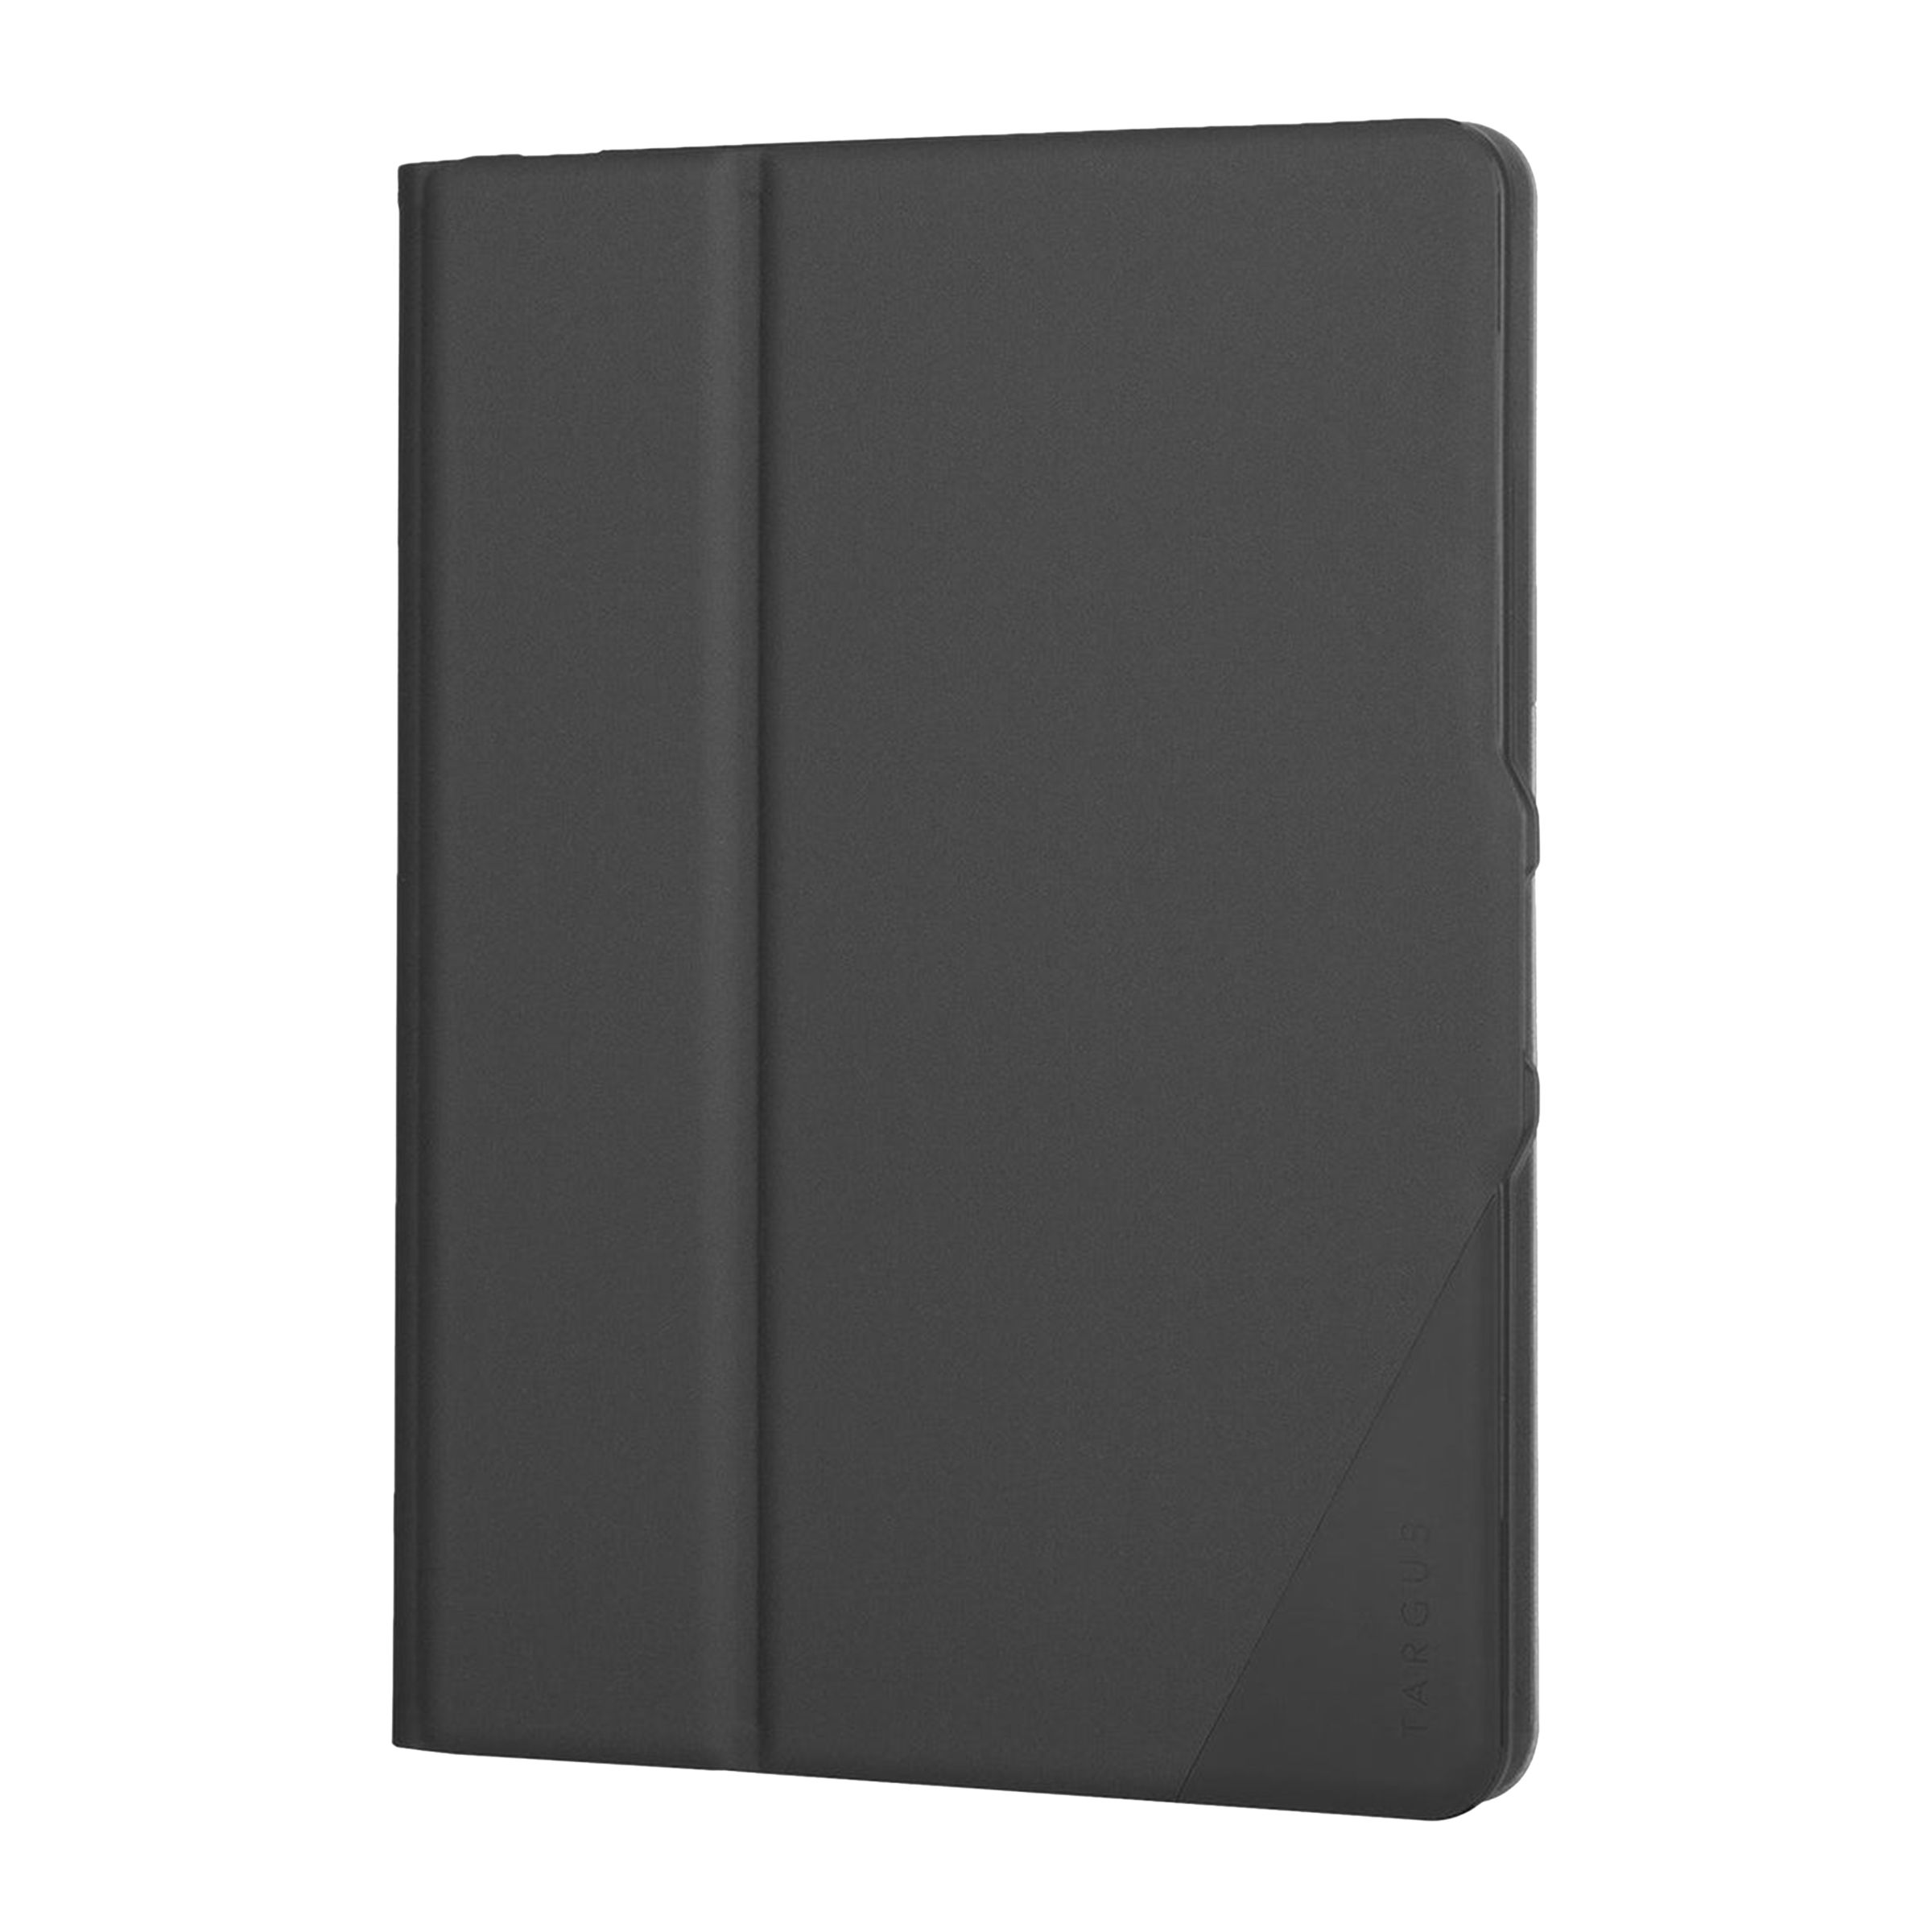 Buy Targus VersaVu Flip Cover for Apple iPad 10.2 Inch (7th, 8th, Gen), 10.5 Inch, iPad Pro Inch (Secure Magnetic Closure, Black) Online – Croma